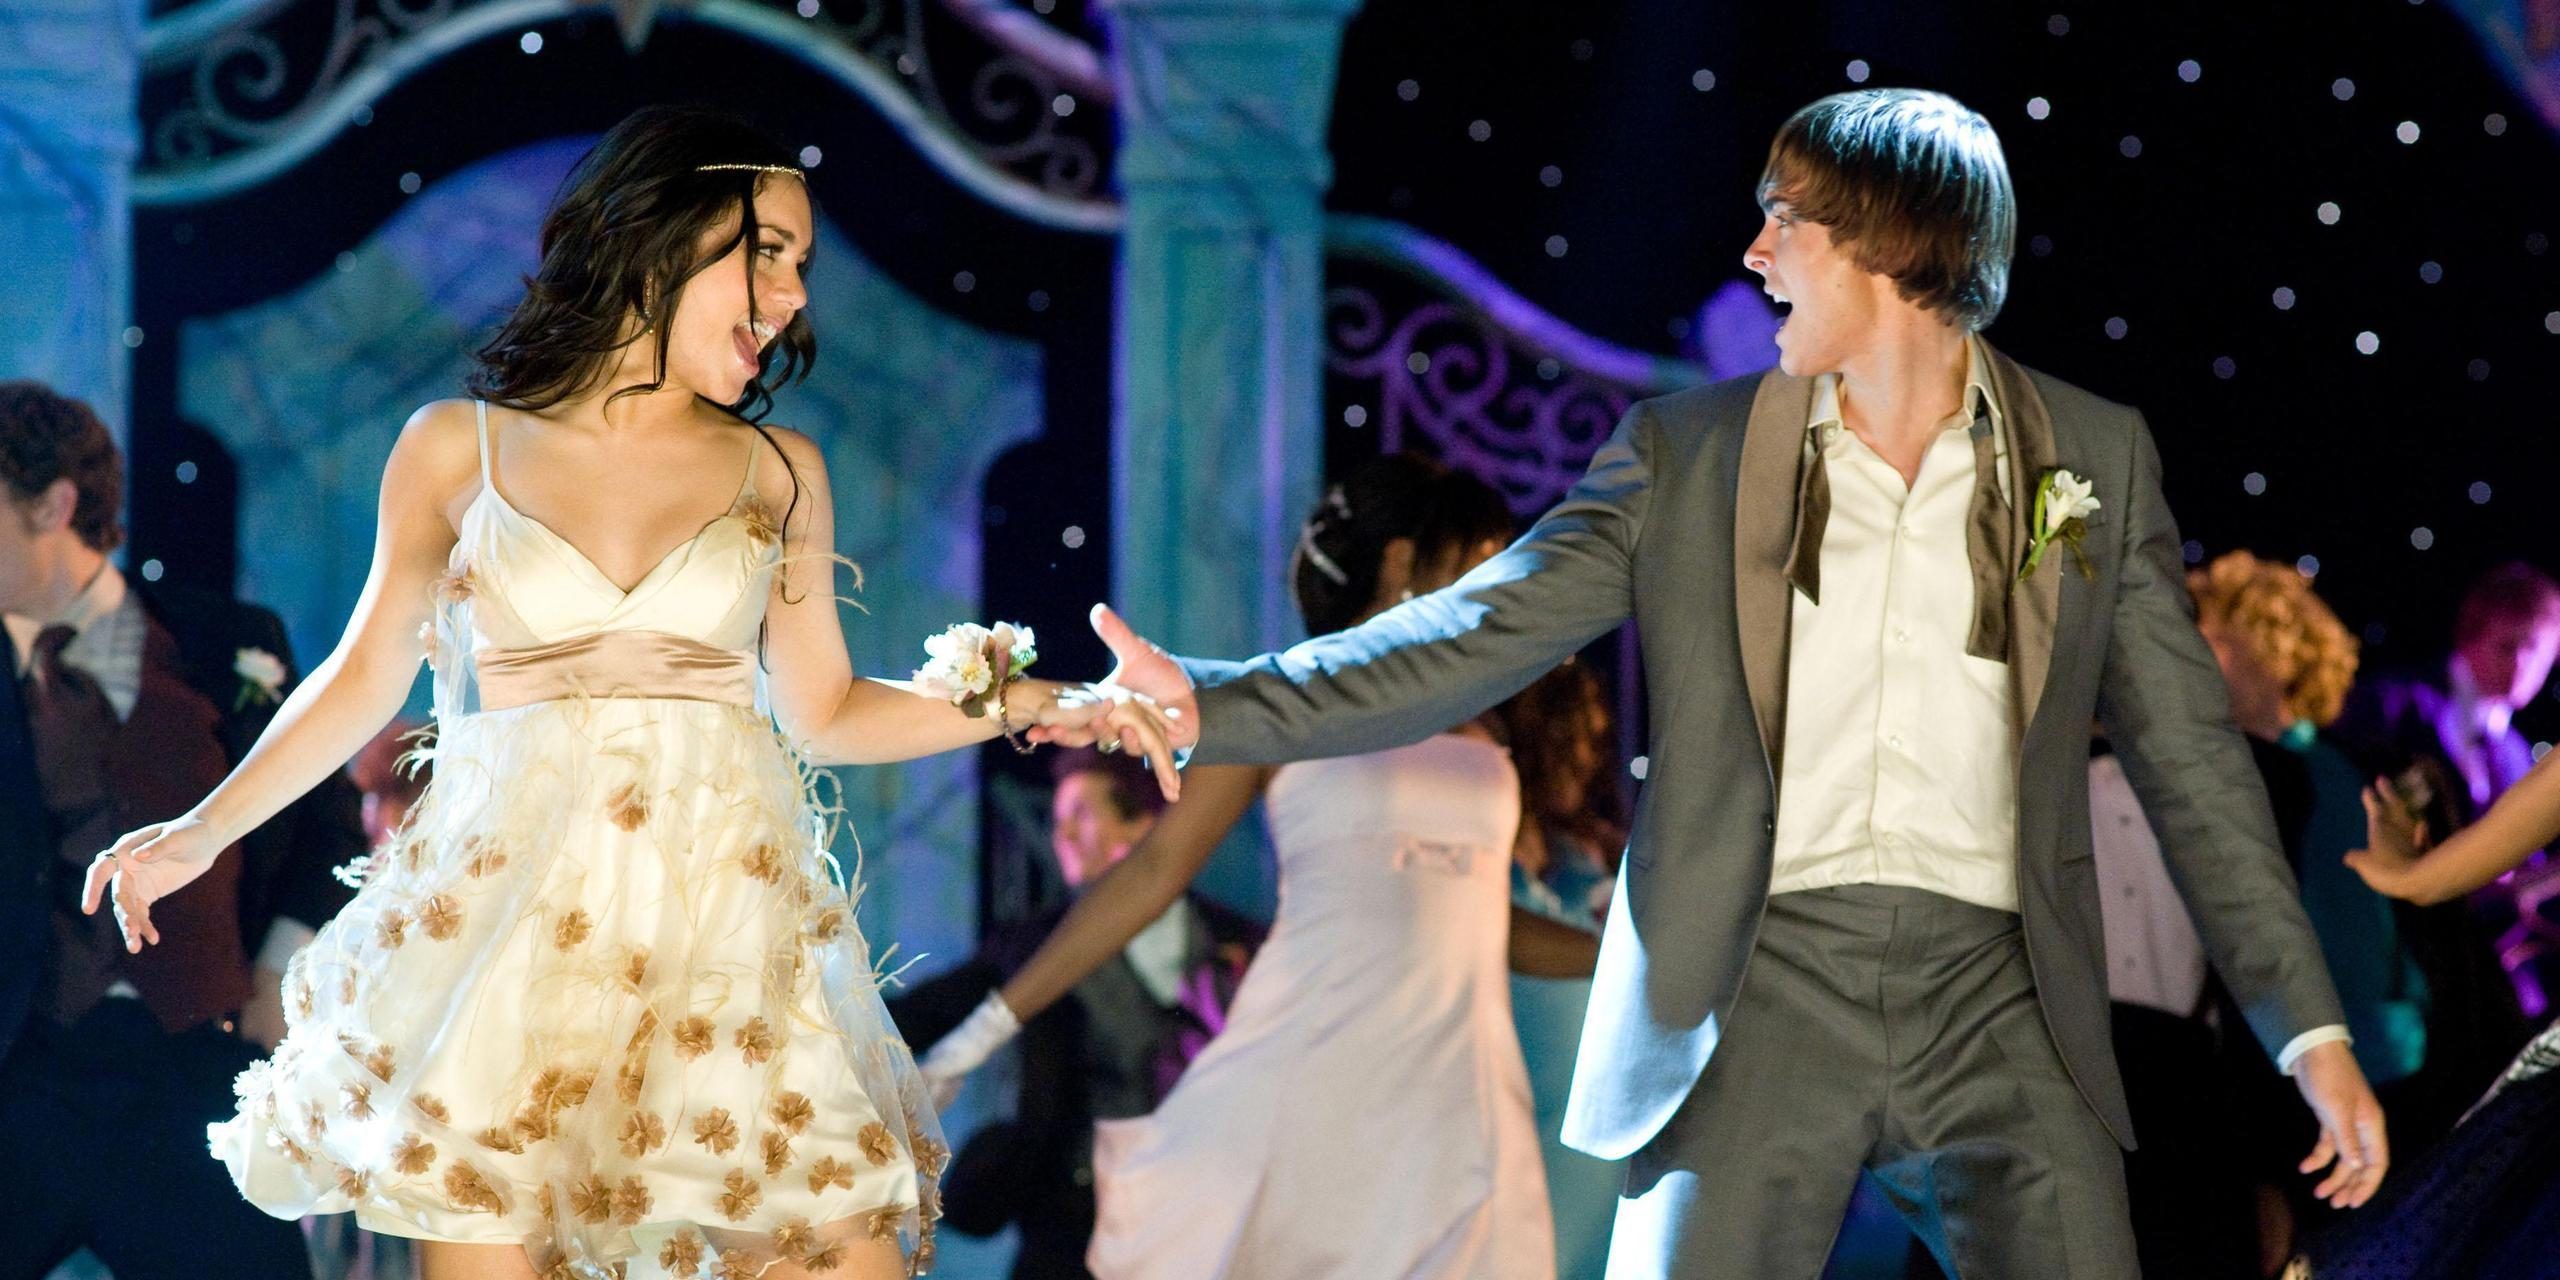 High School Musical 5 Reasons Gabriella Is The Best Character (& 5 Reasons She’s The Worst)